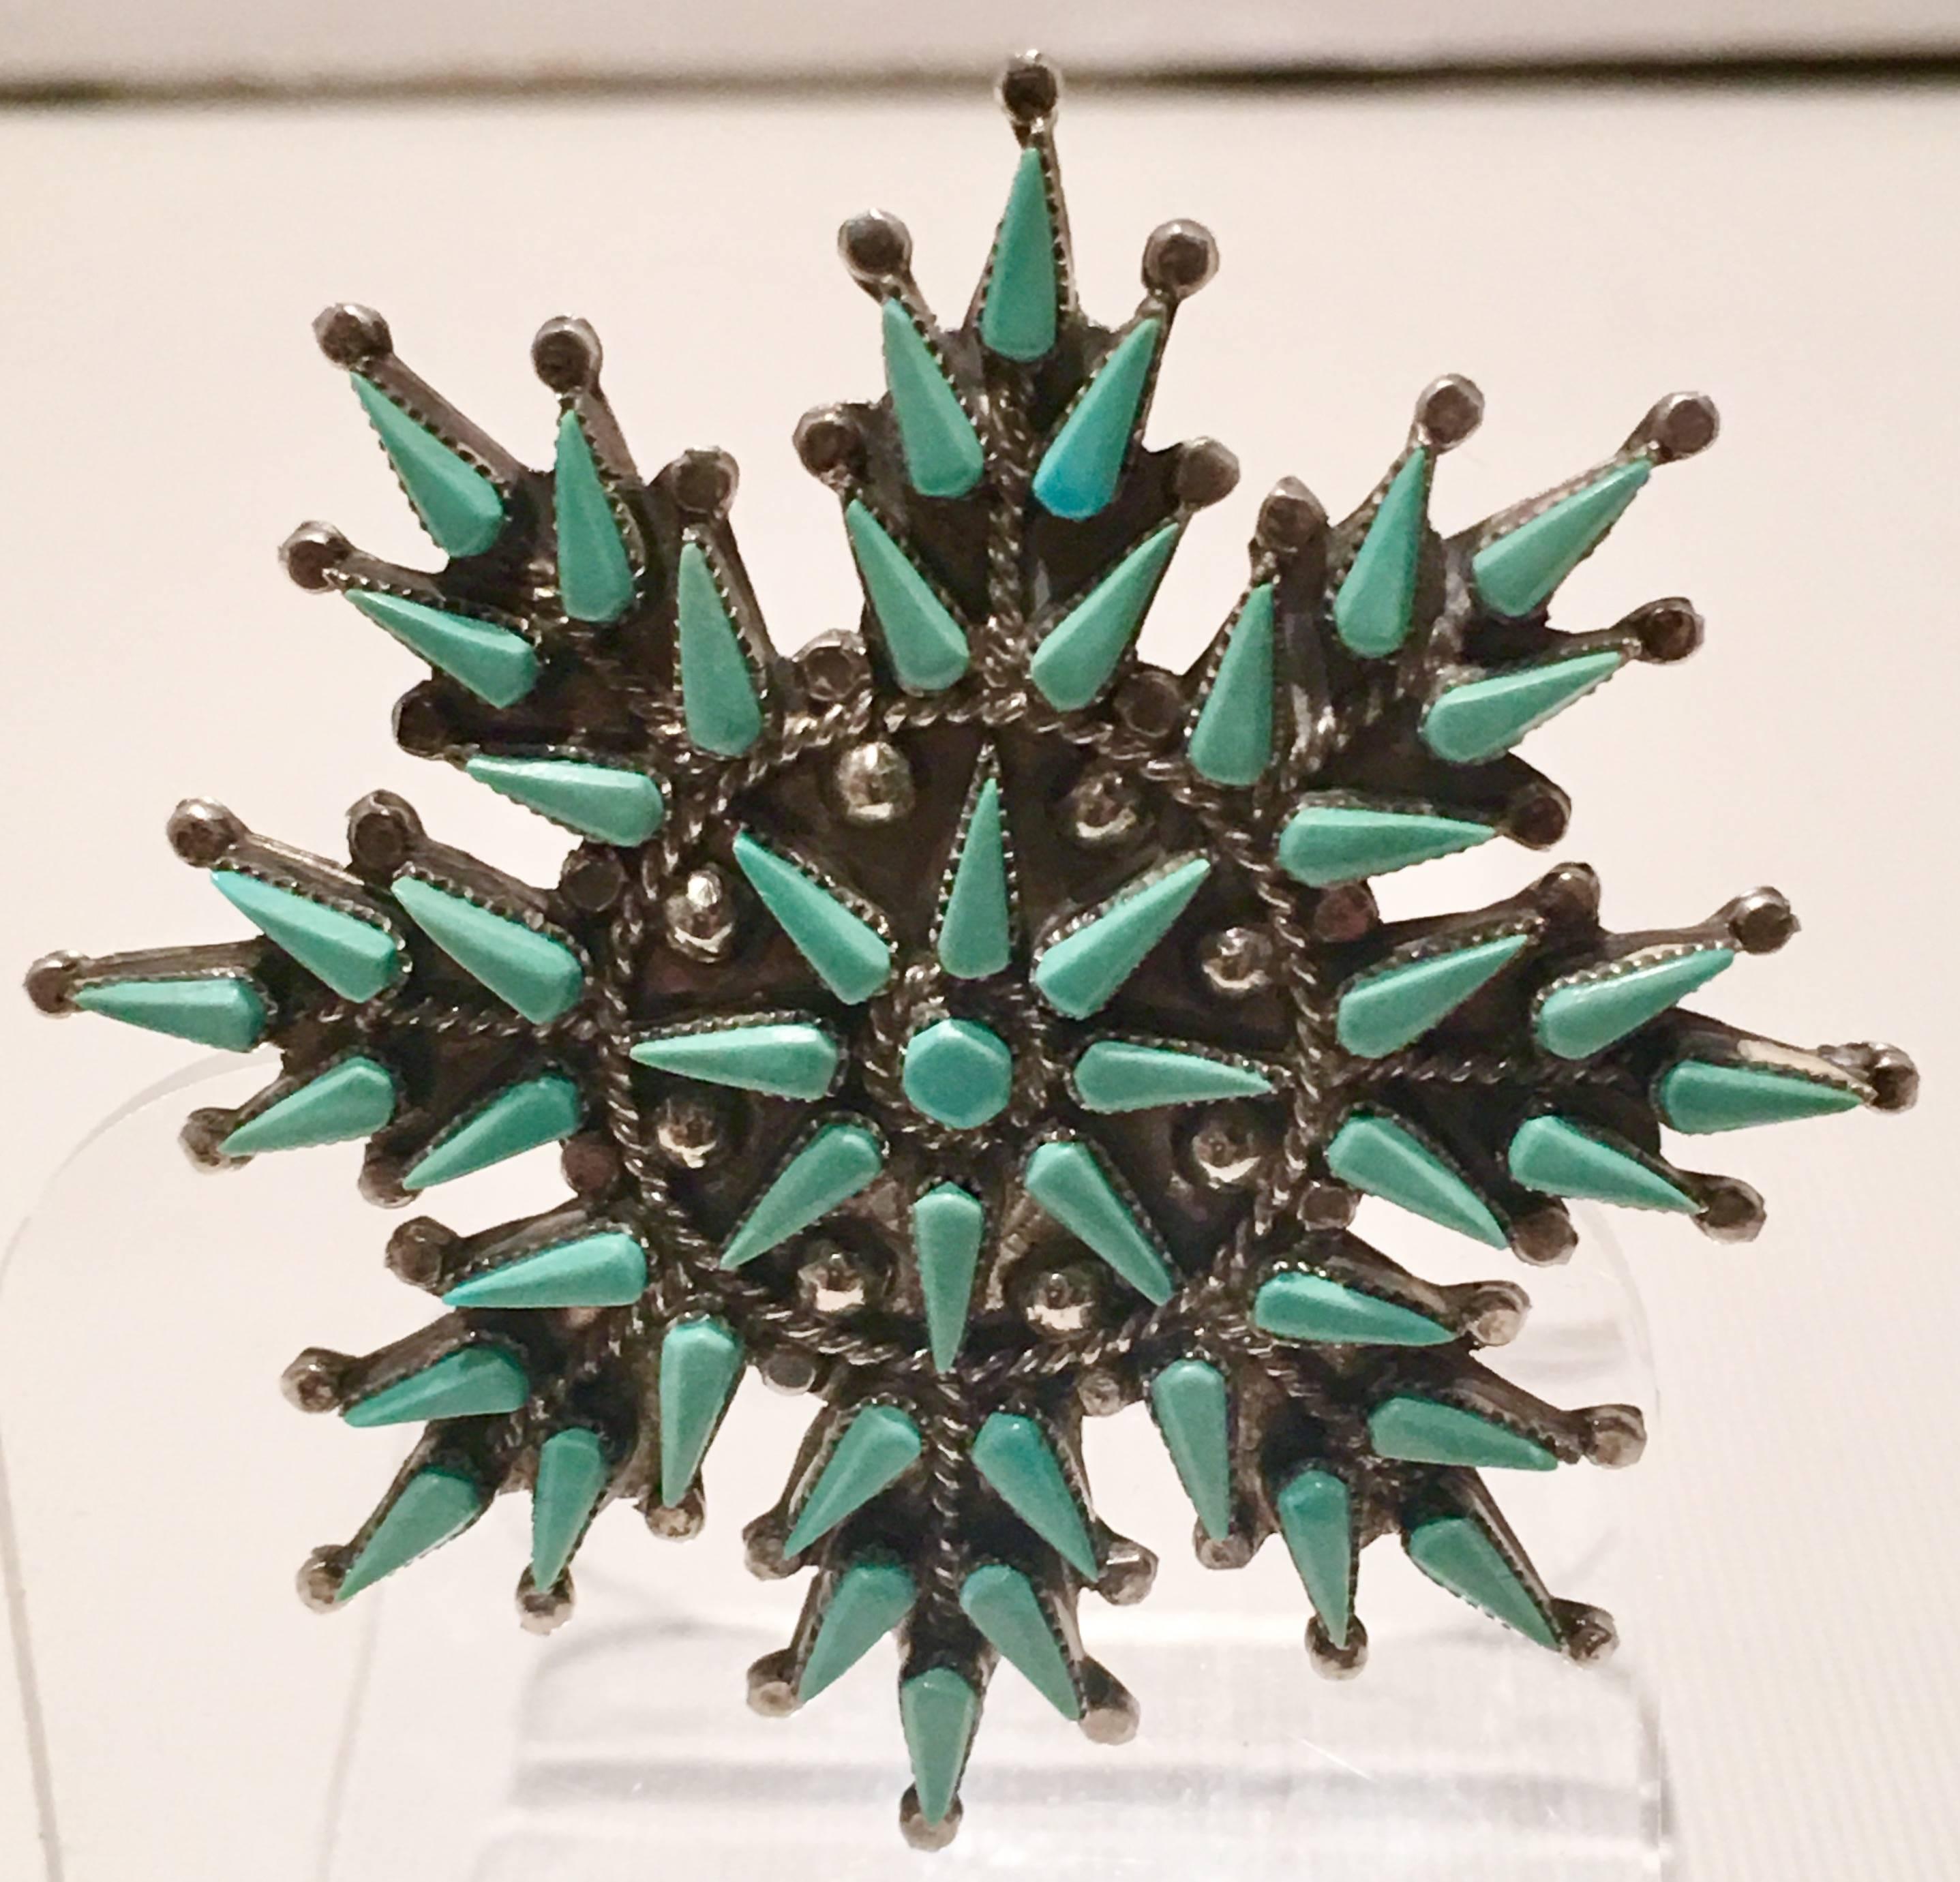 1940s sterling silver and turquoise needlepoint snow flake brooch signed by the artist, This handmade piece is signed on the underside, Vera Halusewa Zuni.
  